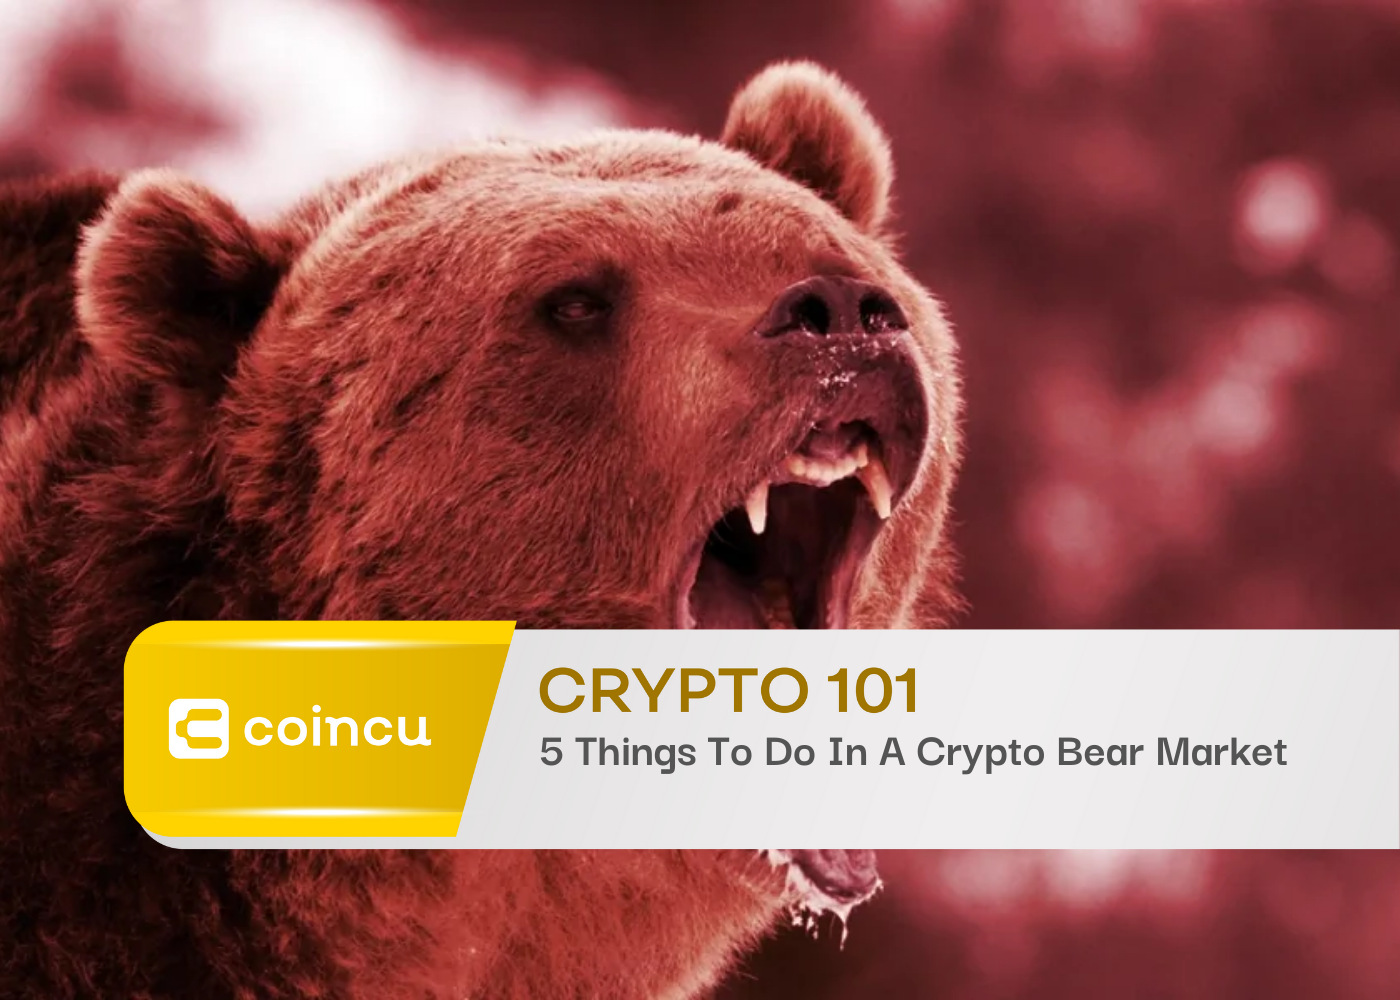 5 Things To Do In A Crypto Bear Market5 Things To Do In A Crypto Bear Market